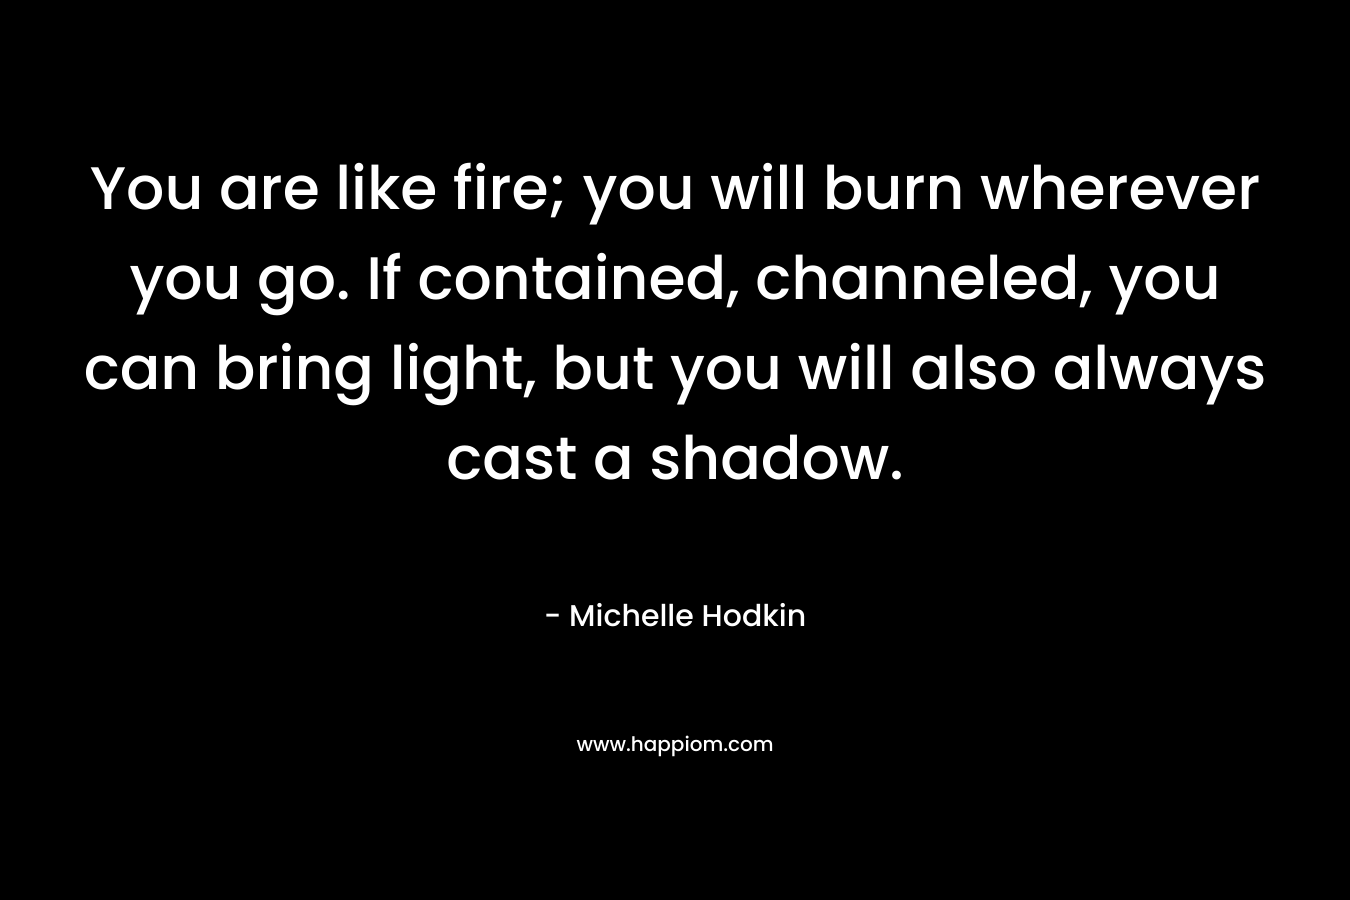 You are like fire; you will burn wherever you go. If contained, channeled, you can bring light, but you will also always cast a shadow.